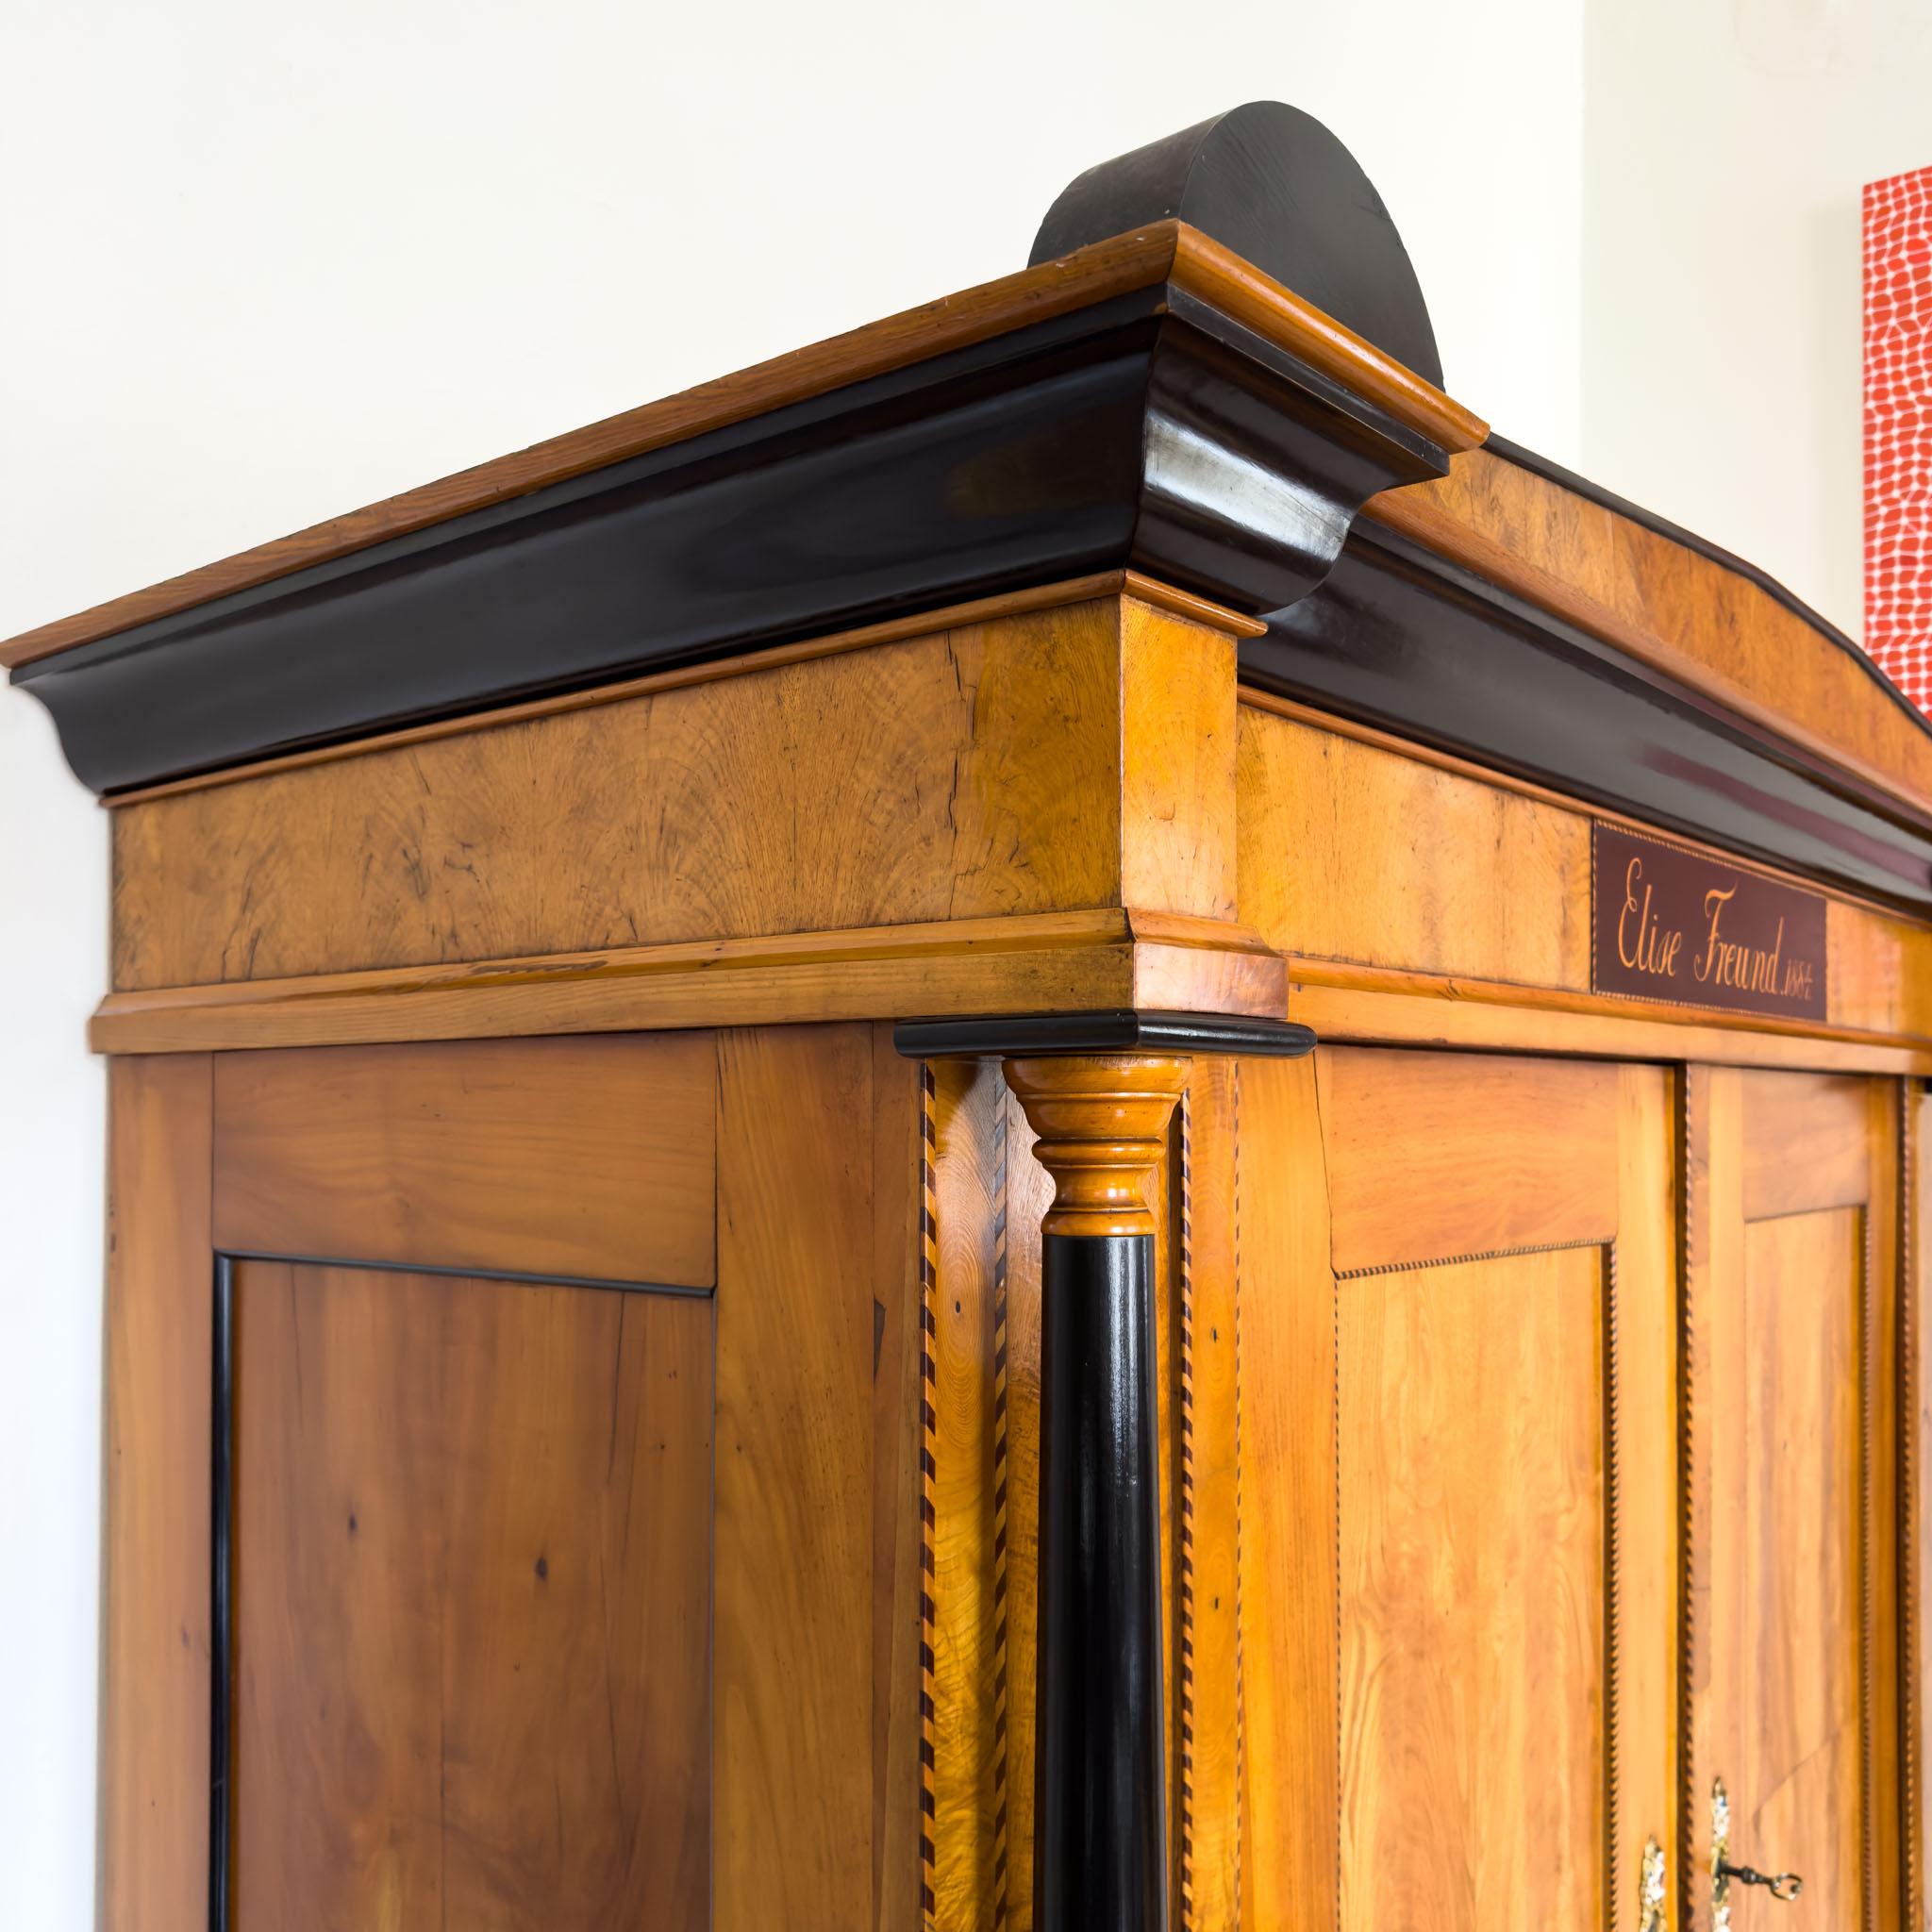 Large Biedermeier-Style Wardrobe in Ash and Cherry, Dated 1884 For Sale 2